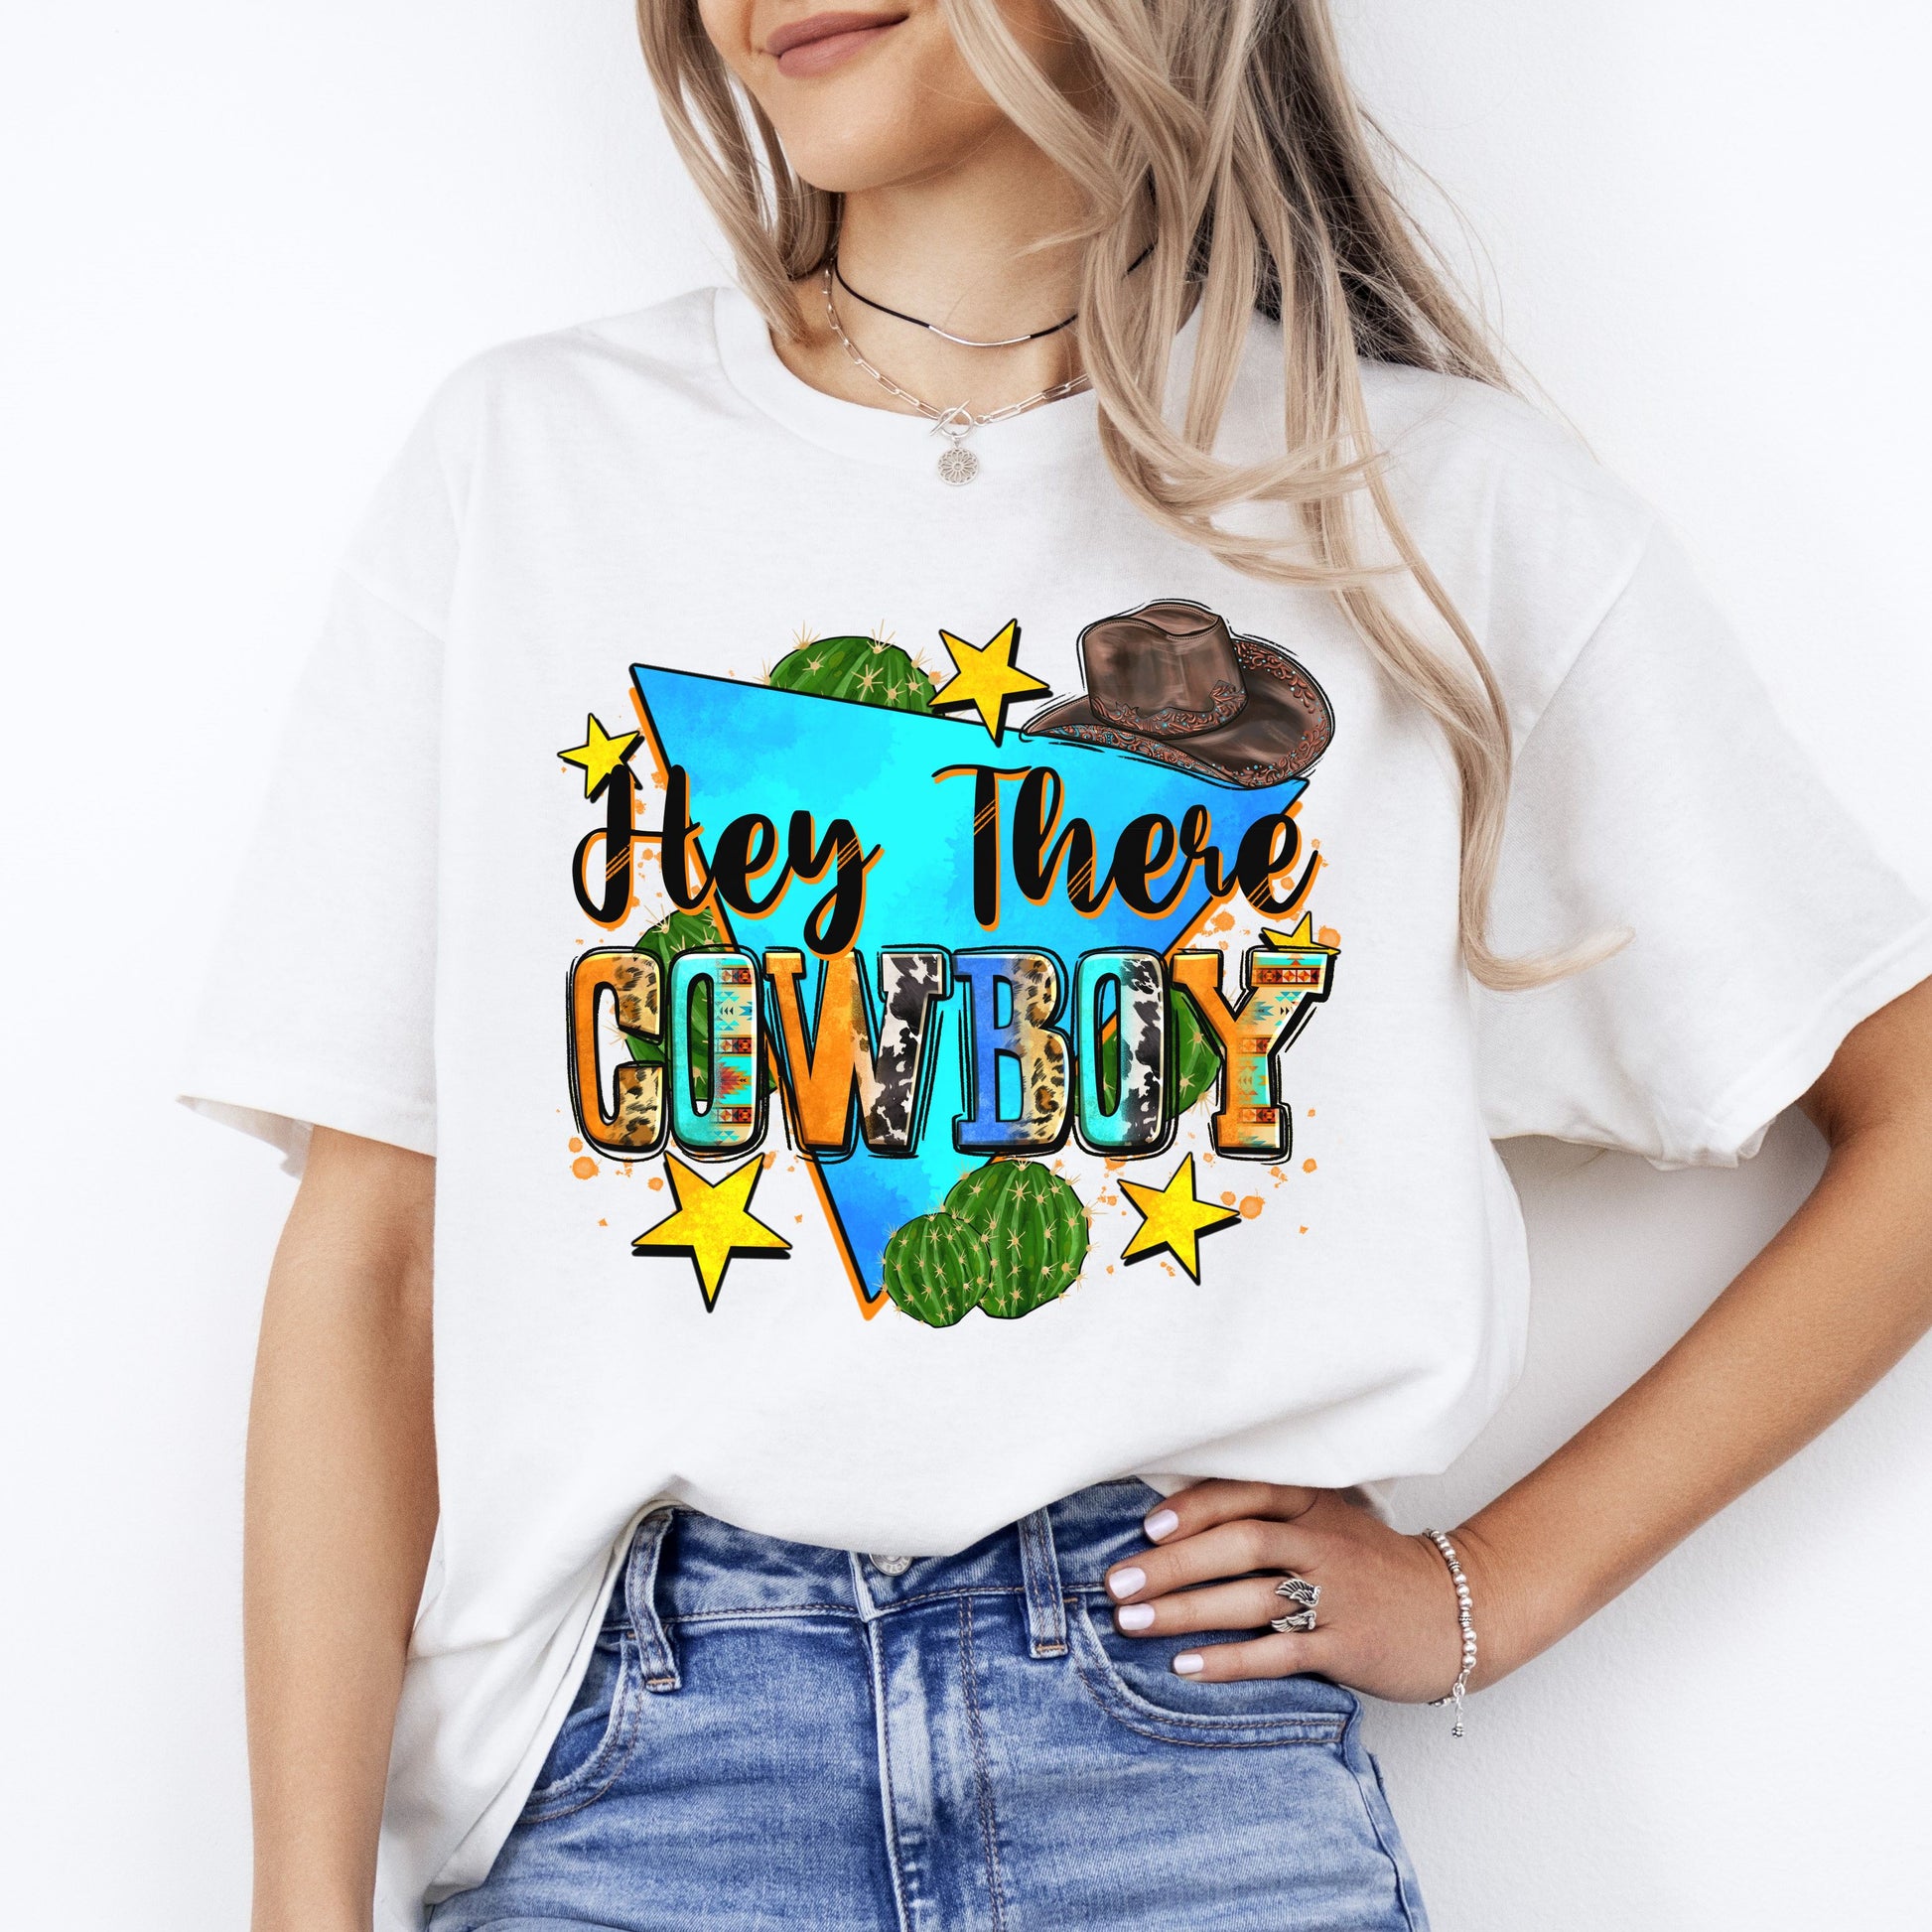 Hey there cowboy T-Shirt gift Western girl Texas cowgirl Unisex tee Sand White Sport Grey-White-Family-Gift-Planet